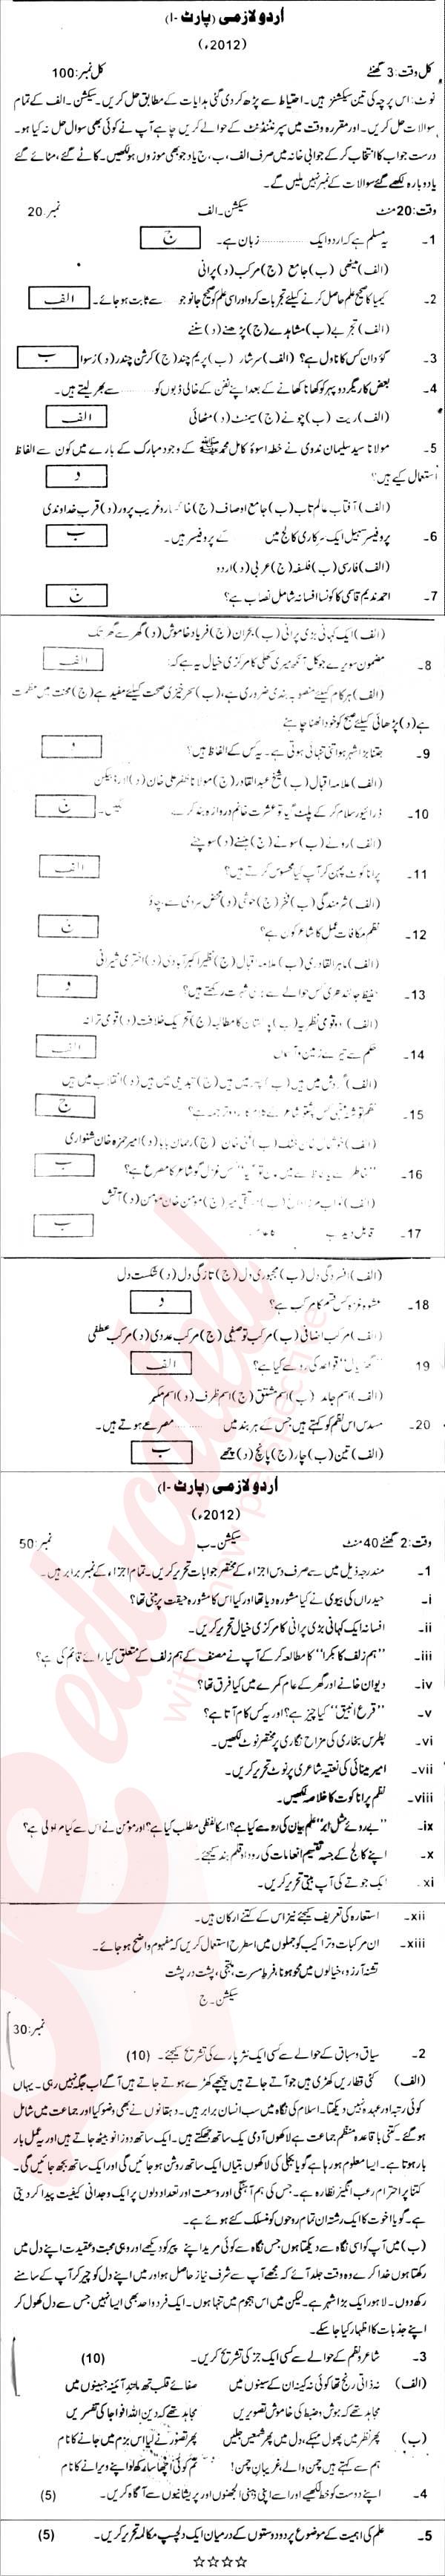 Urdu 11th class Past Paper Group 1 BISE Abbottabad 2012